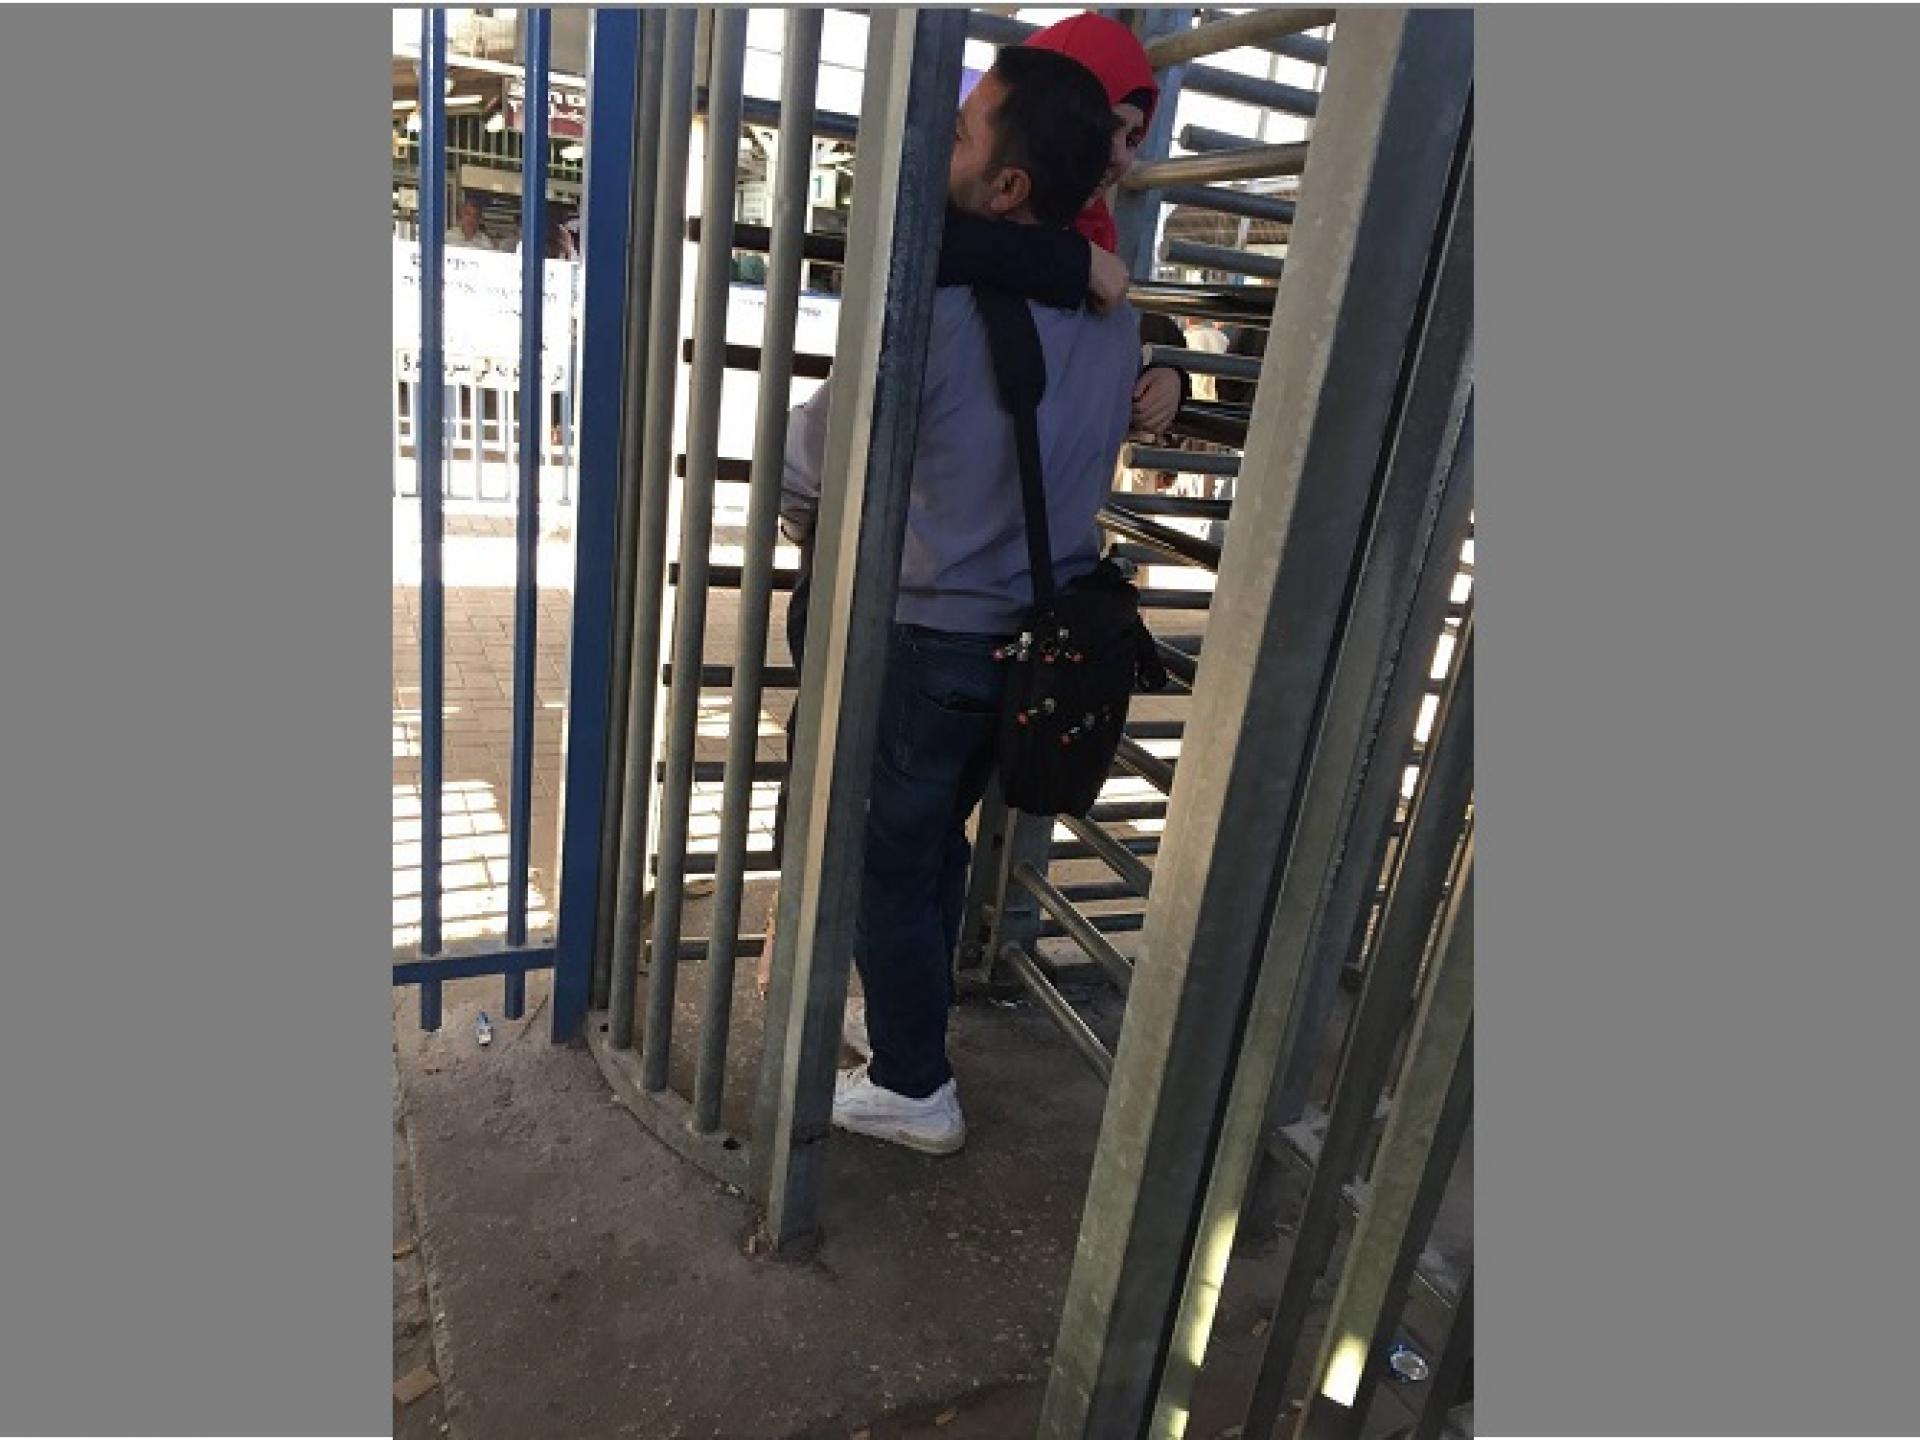 The husband is carrying his sick wife through the turnstiles